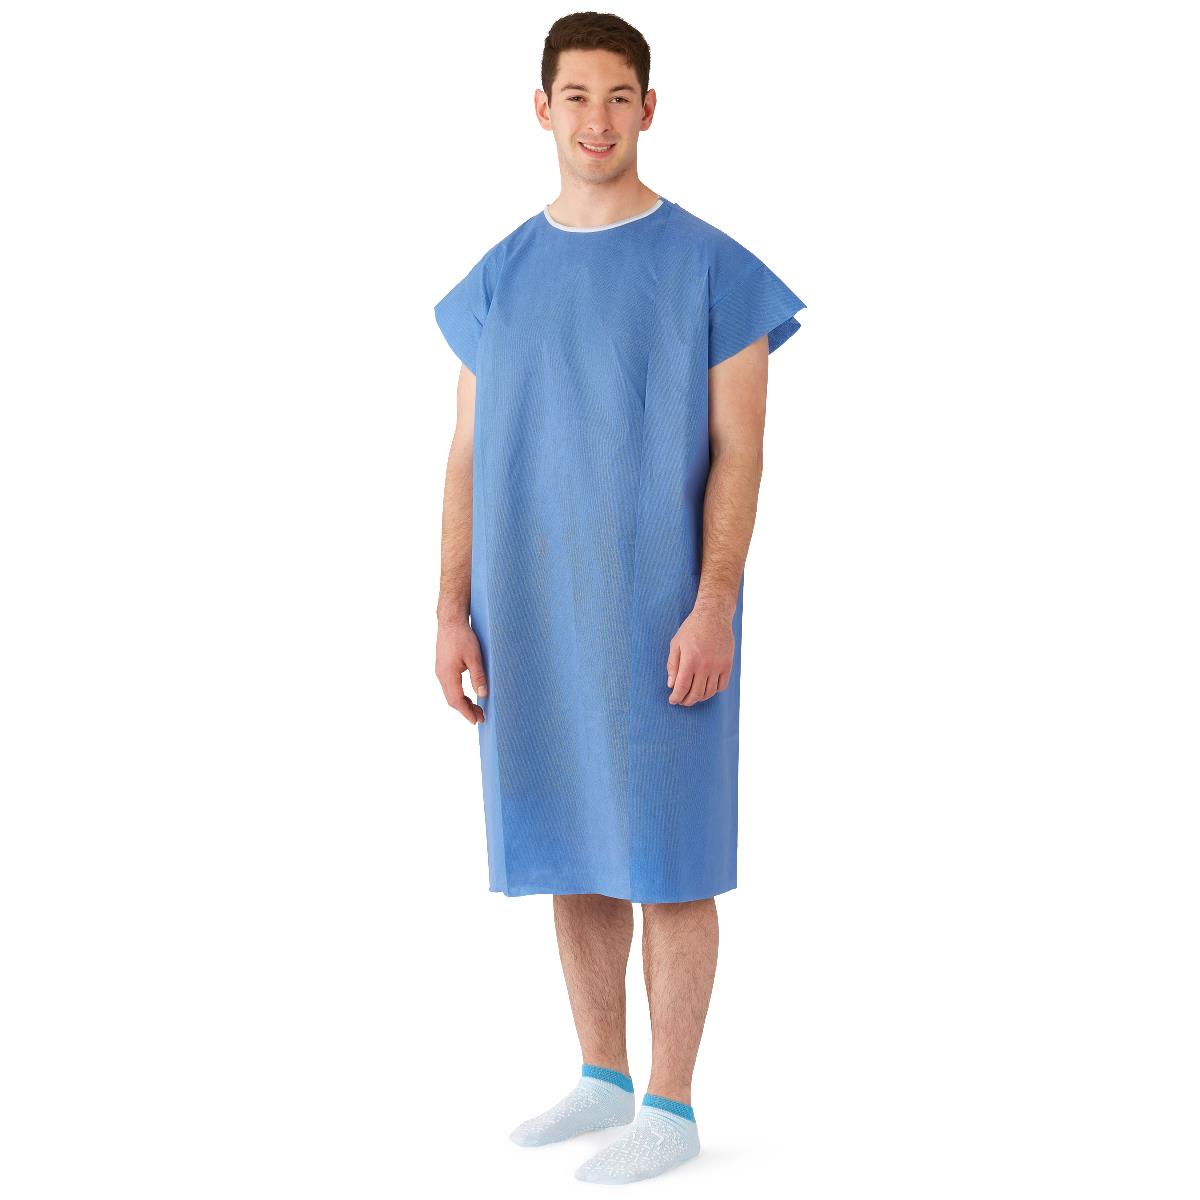 Hospital Gowns Candy Blue – surgicalcaps.com